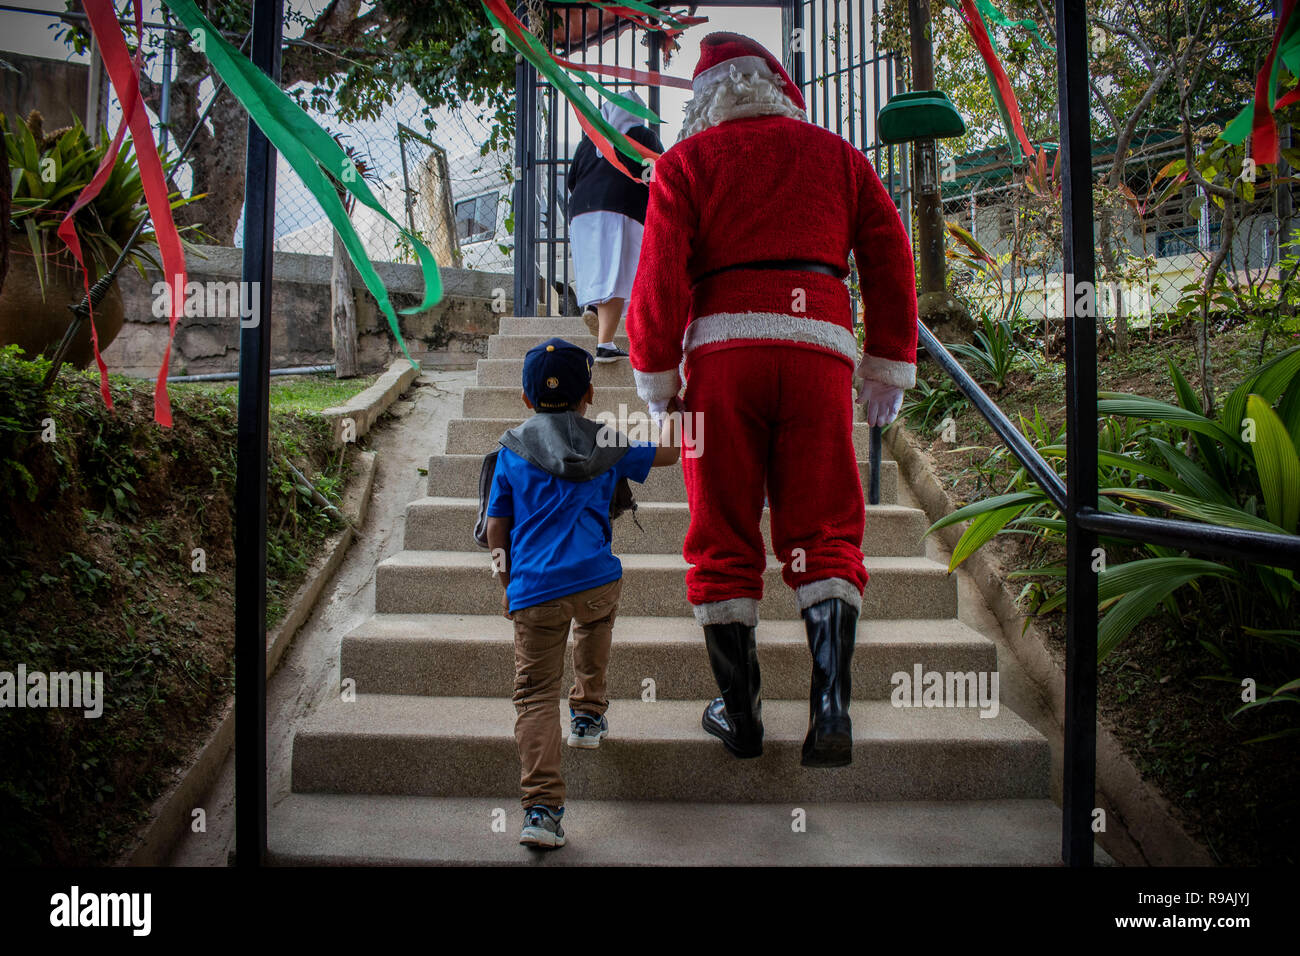 Caracas, Venezuela. 21st Dec, 2018. 'Santa Claus' comes to a congregation in the countryside east of Caracas and brings gifts to children through the initiative 'Un Juguete: Una Buena Noticia' (A Toy, a Good News). The initiative was founded by reporters and journalists in Venezuela. The group also provides school supplies for children from a poorer neighbourhood in Caracas. Credit: Rayner Pena/dpa/Alamy Live News Stock Photo